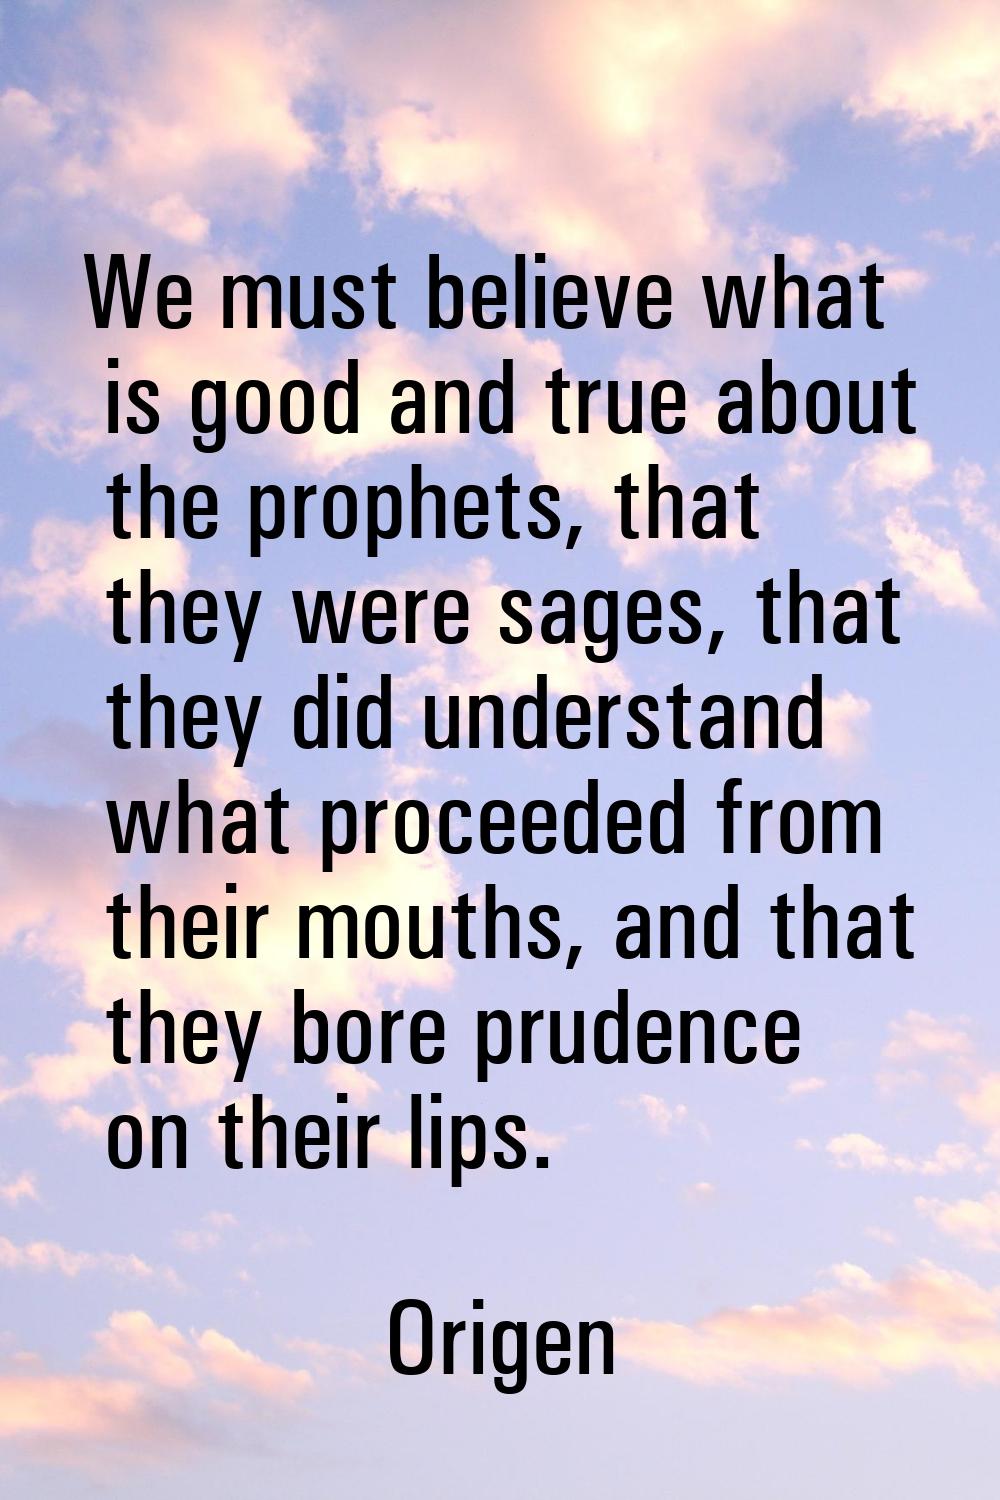 We must believe what is good and true about the prophets, that they were sages, that they did under